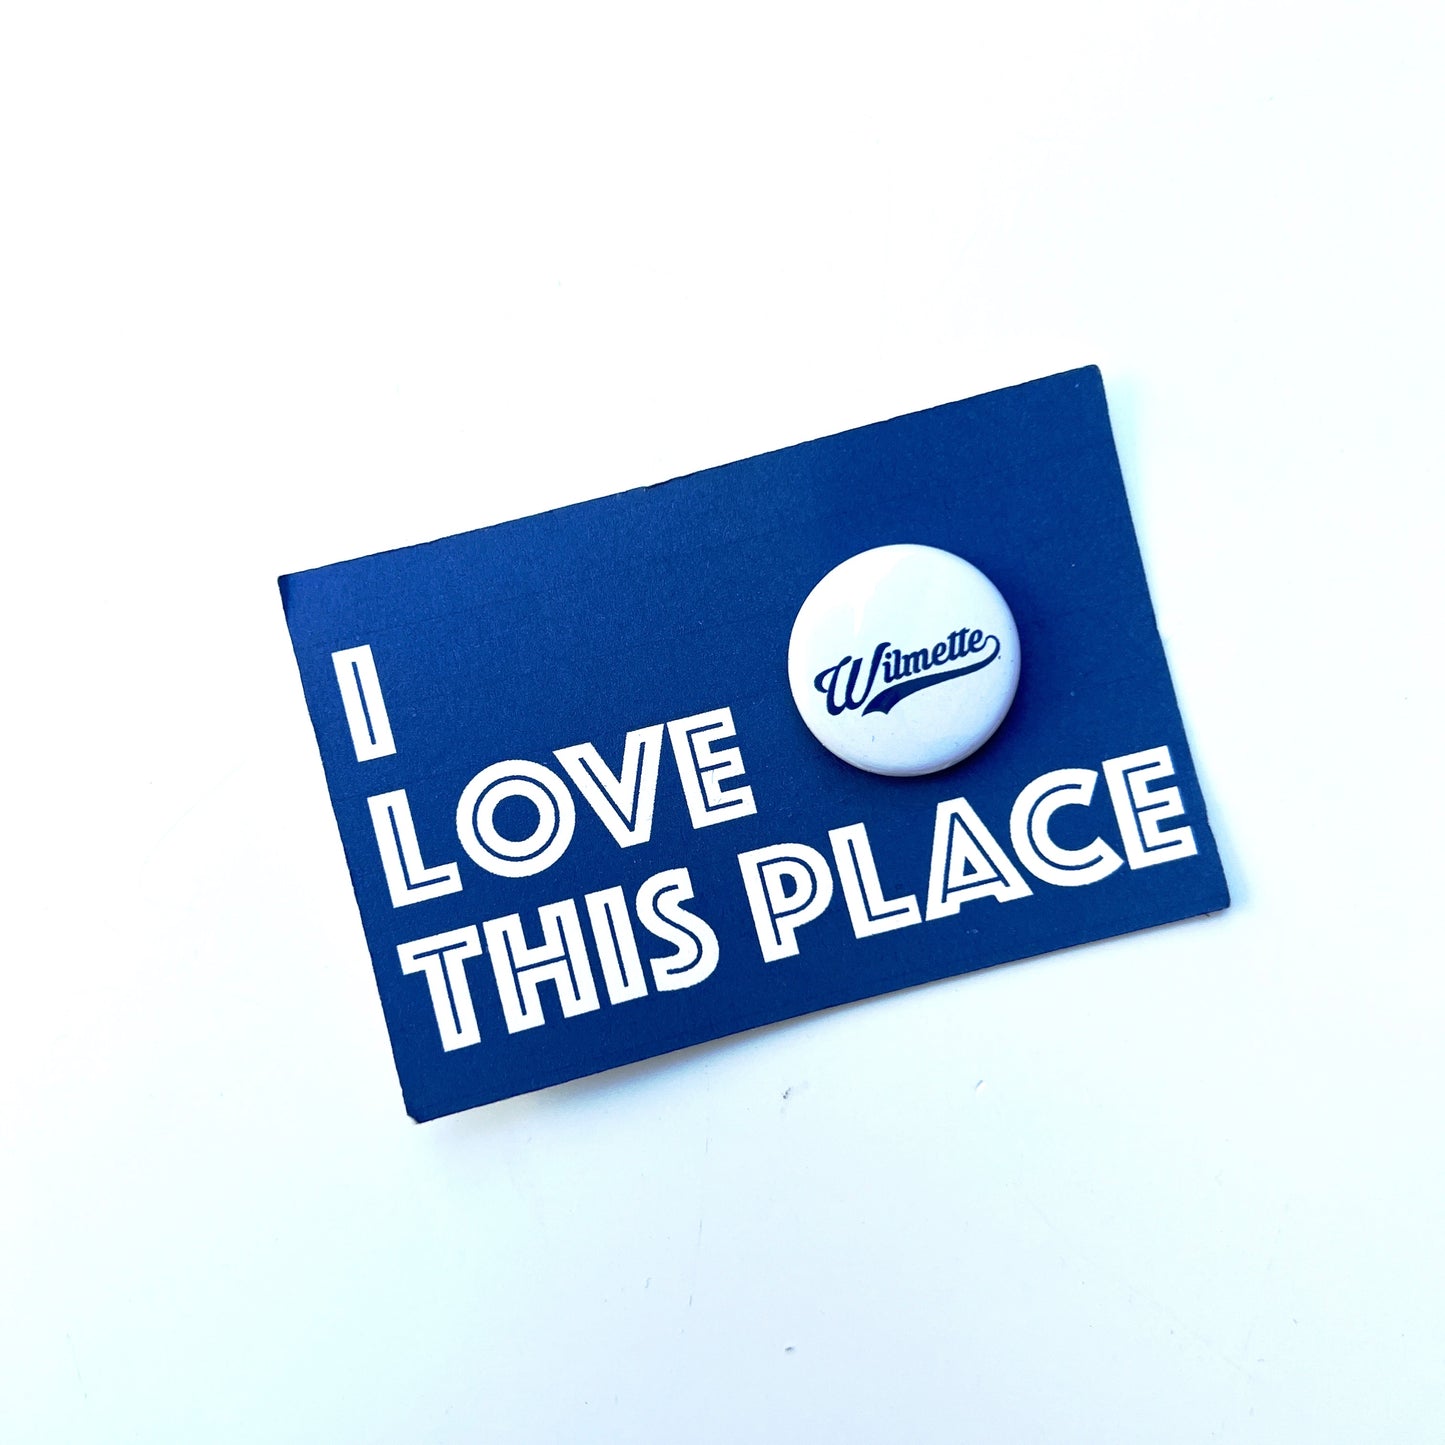 I Love This Place - Wilmette Button